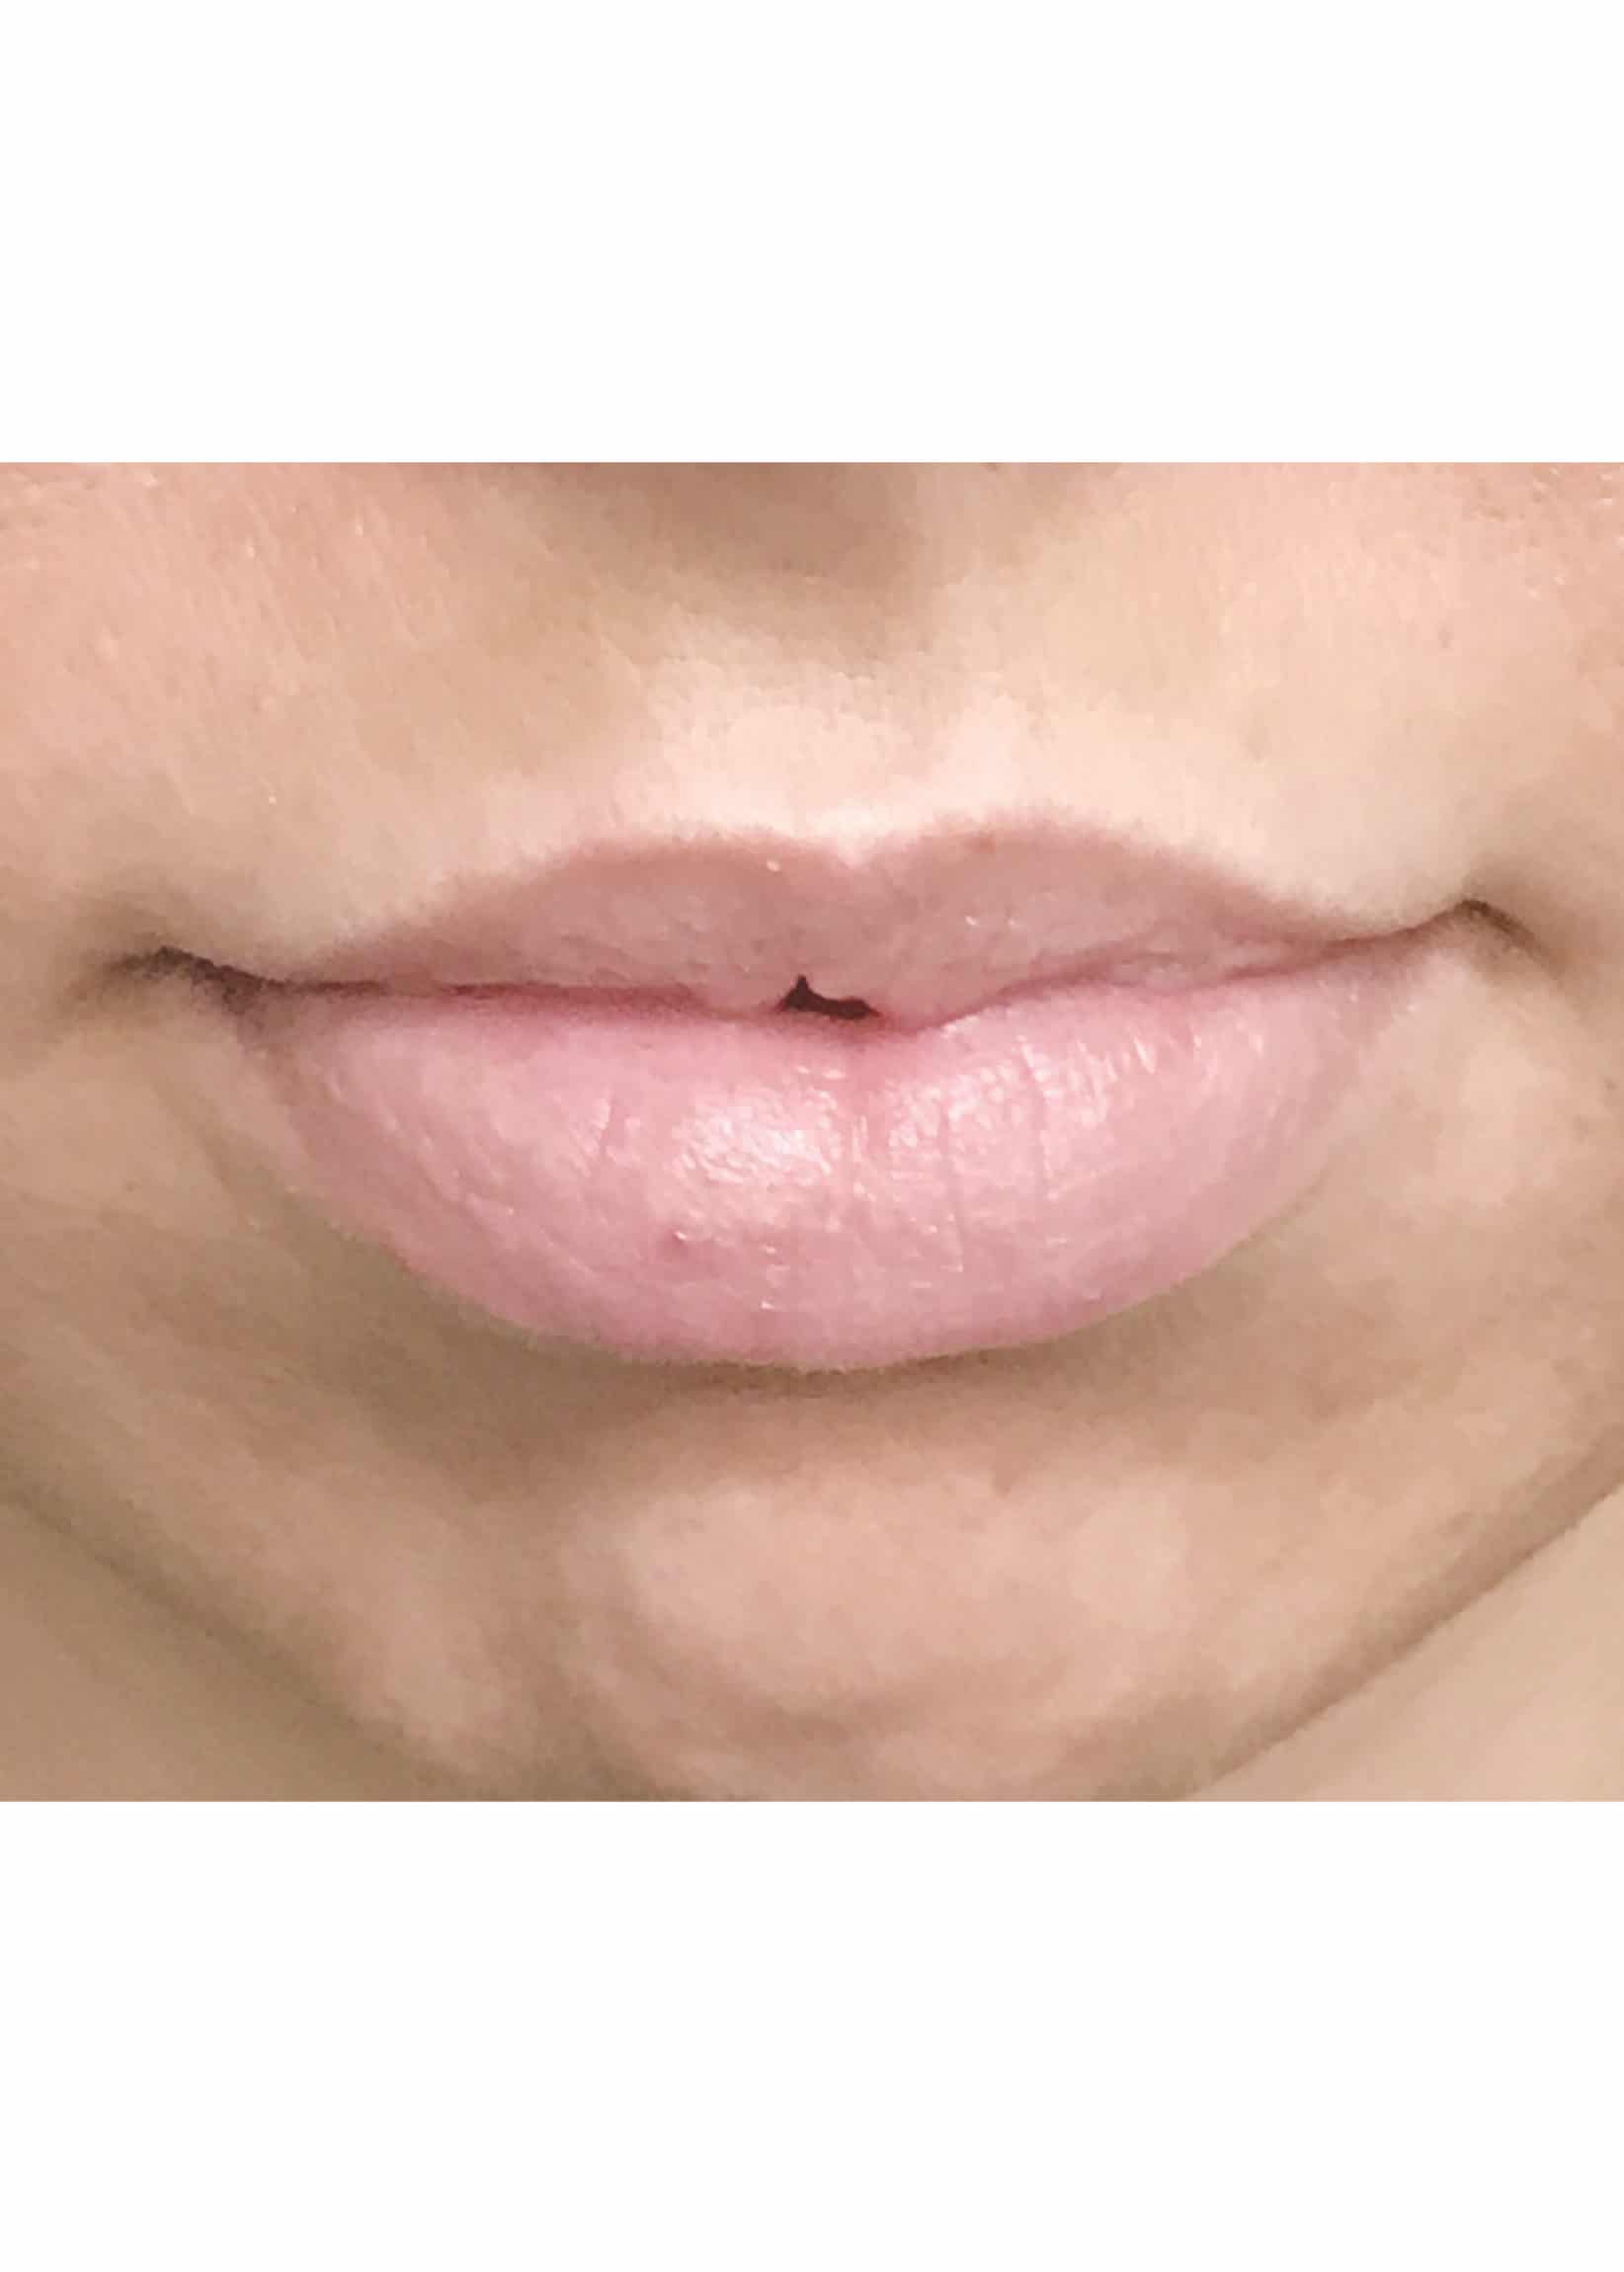 TheSkinCenter ProviderPages TiffaneyBeddow LipFiller Before 1 scaled 1